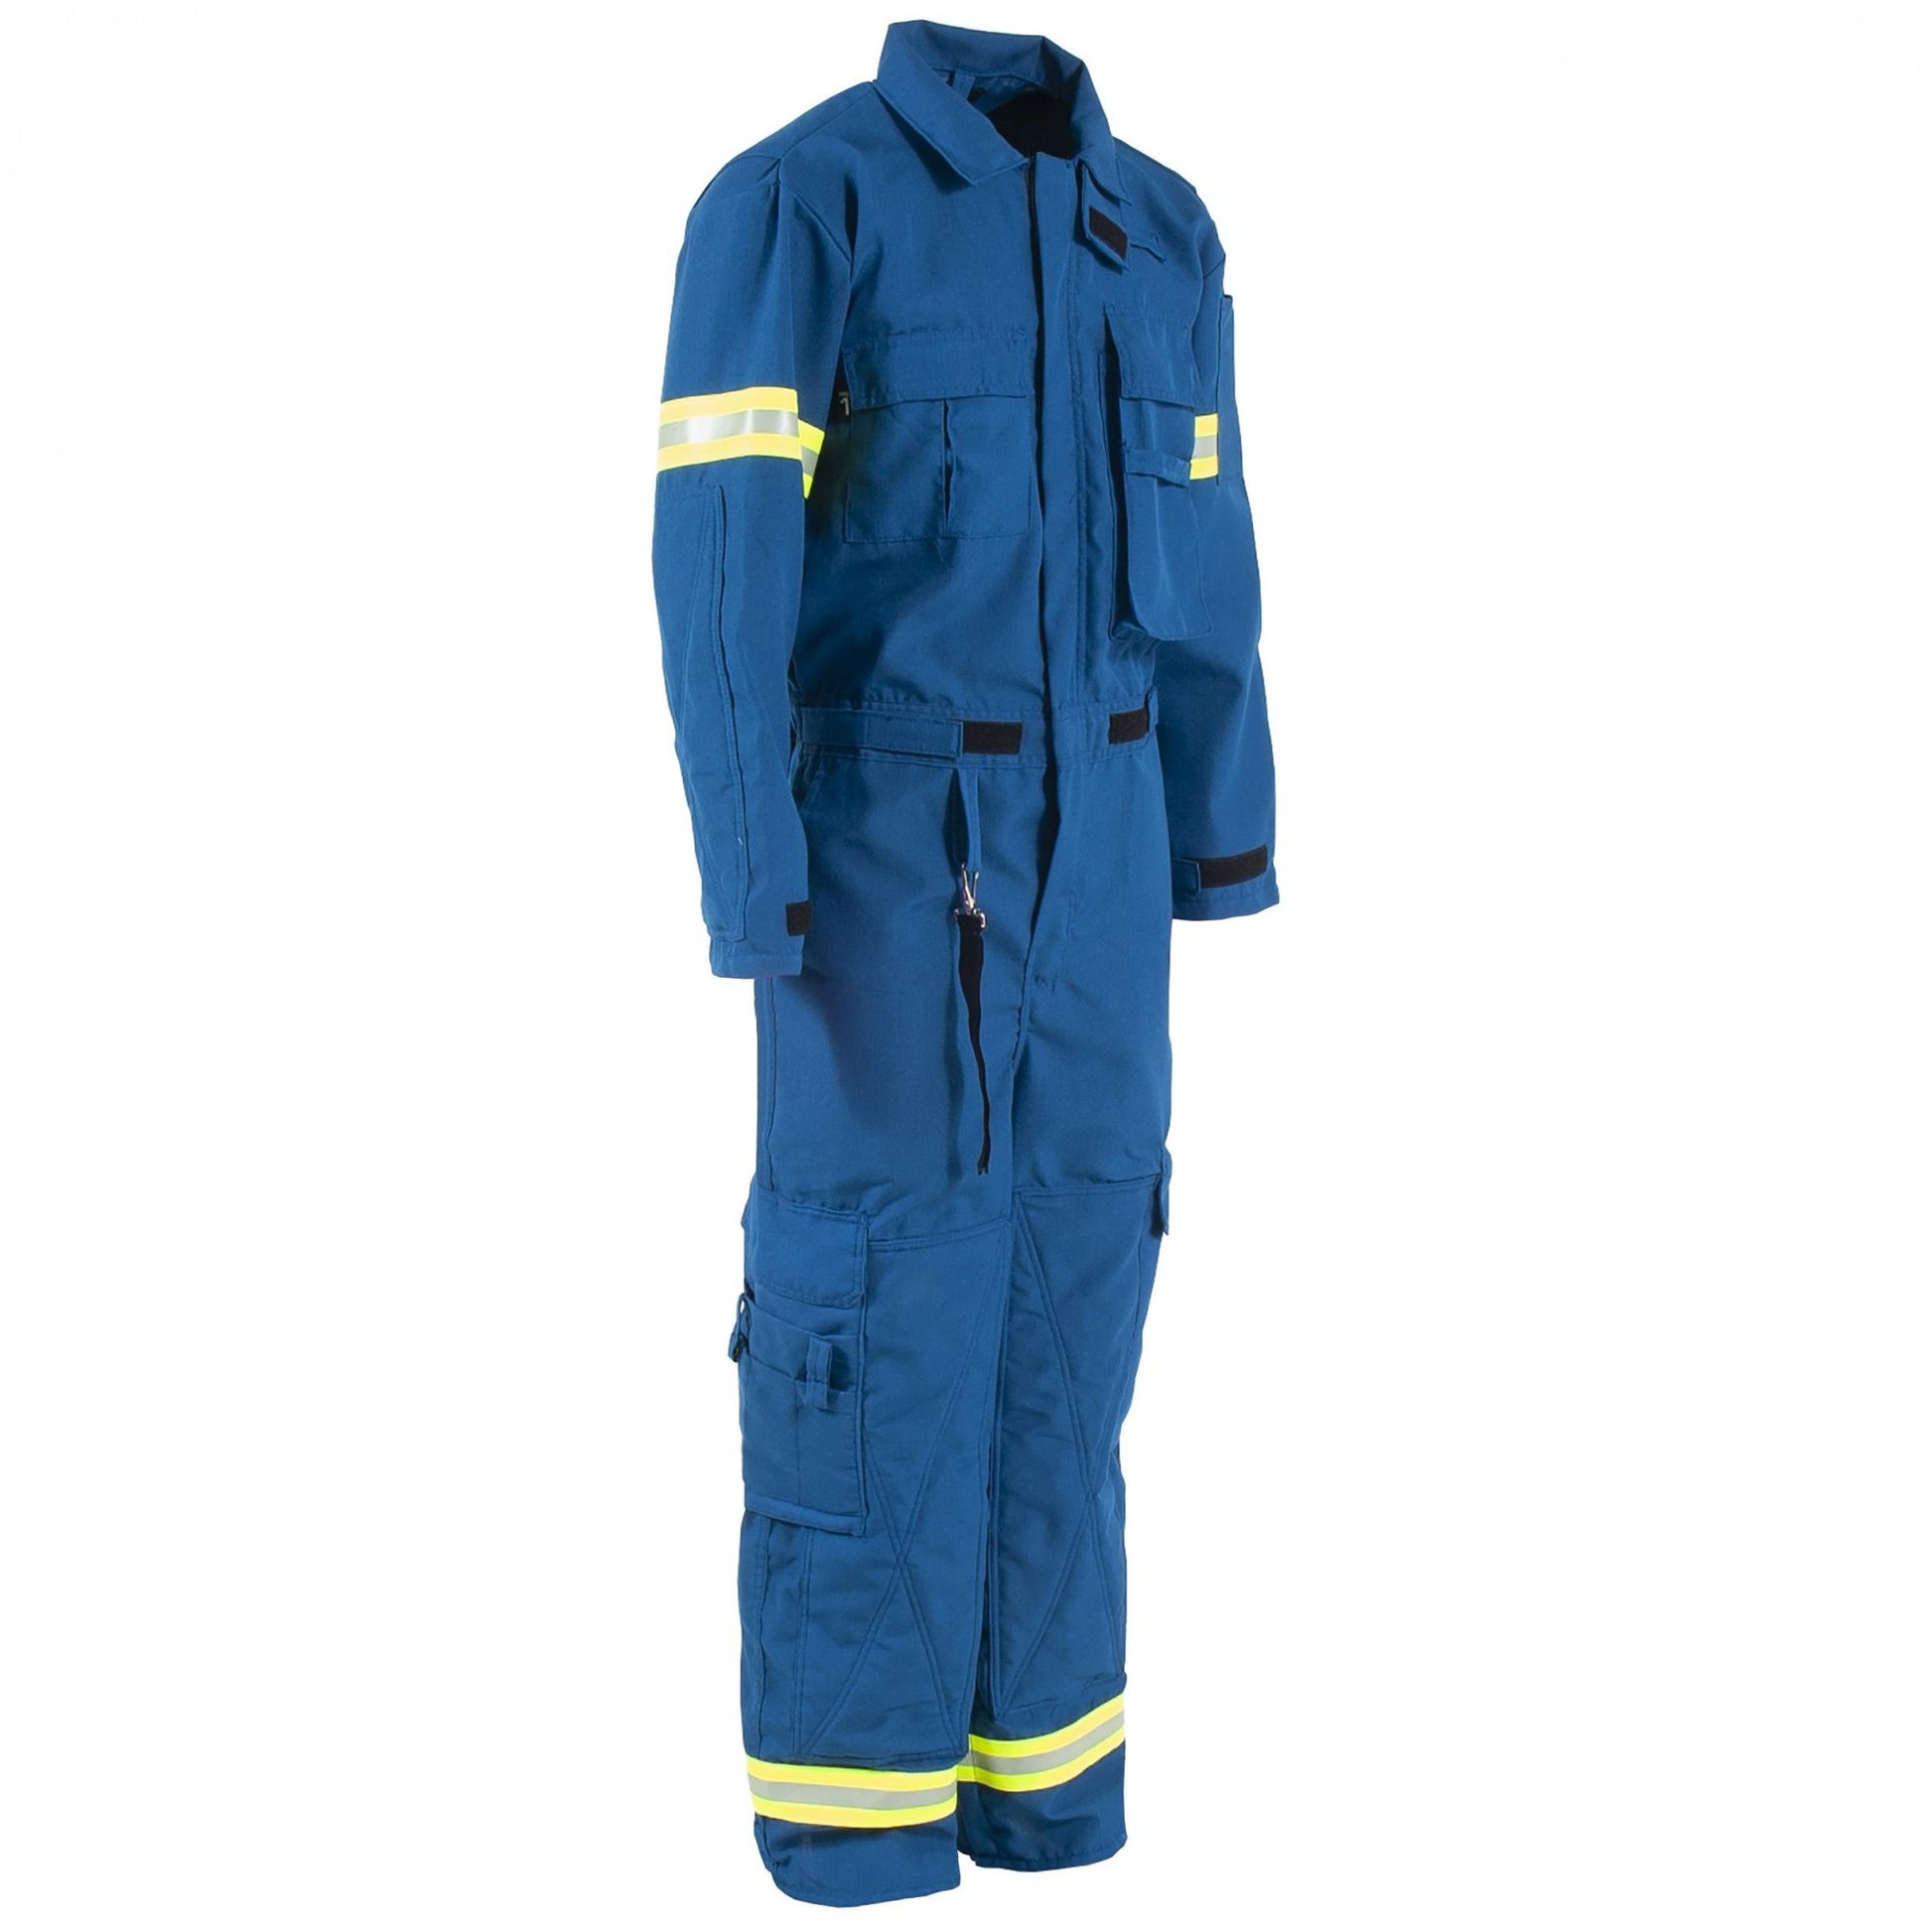 Neese VN4CAERY Nomex 4.5 oz Extrication FR Coverall